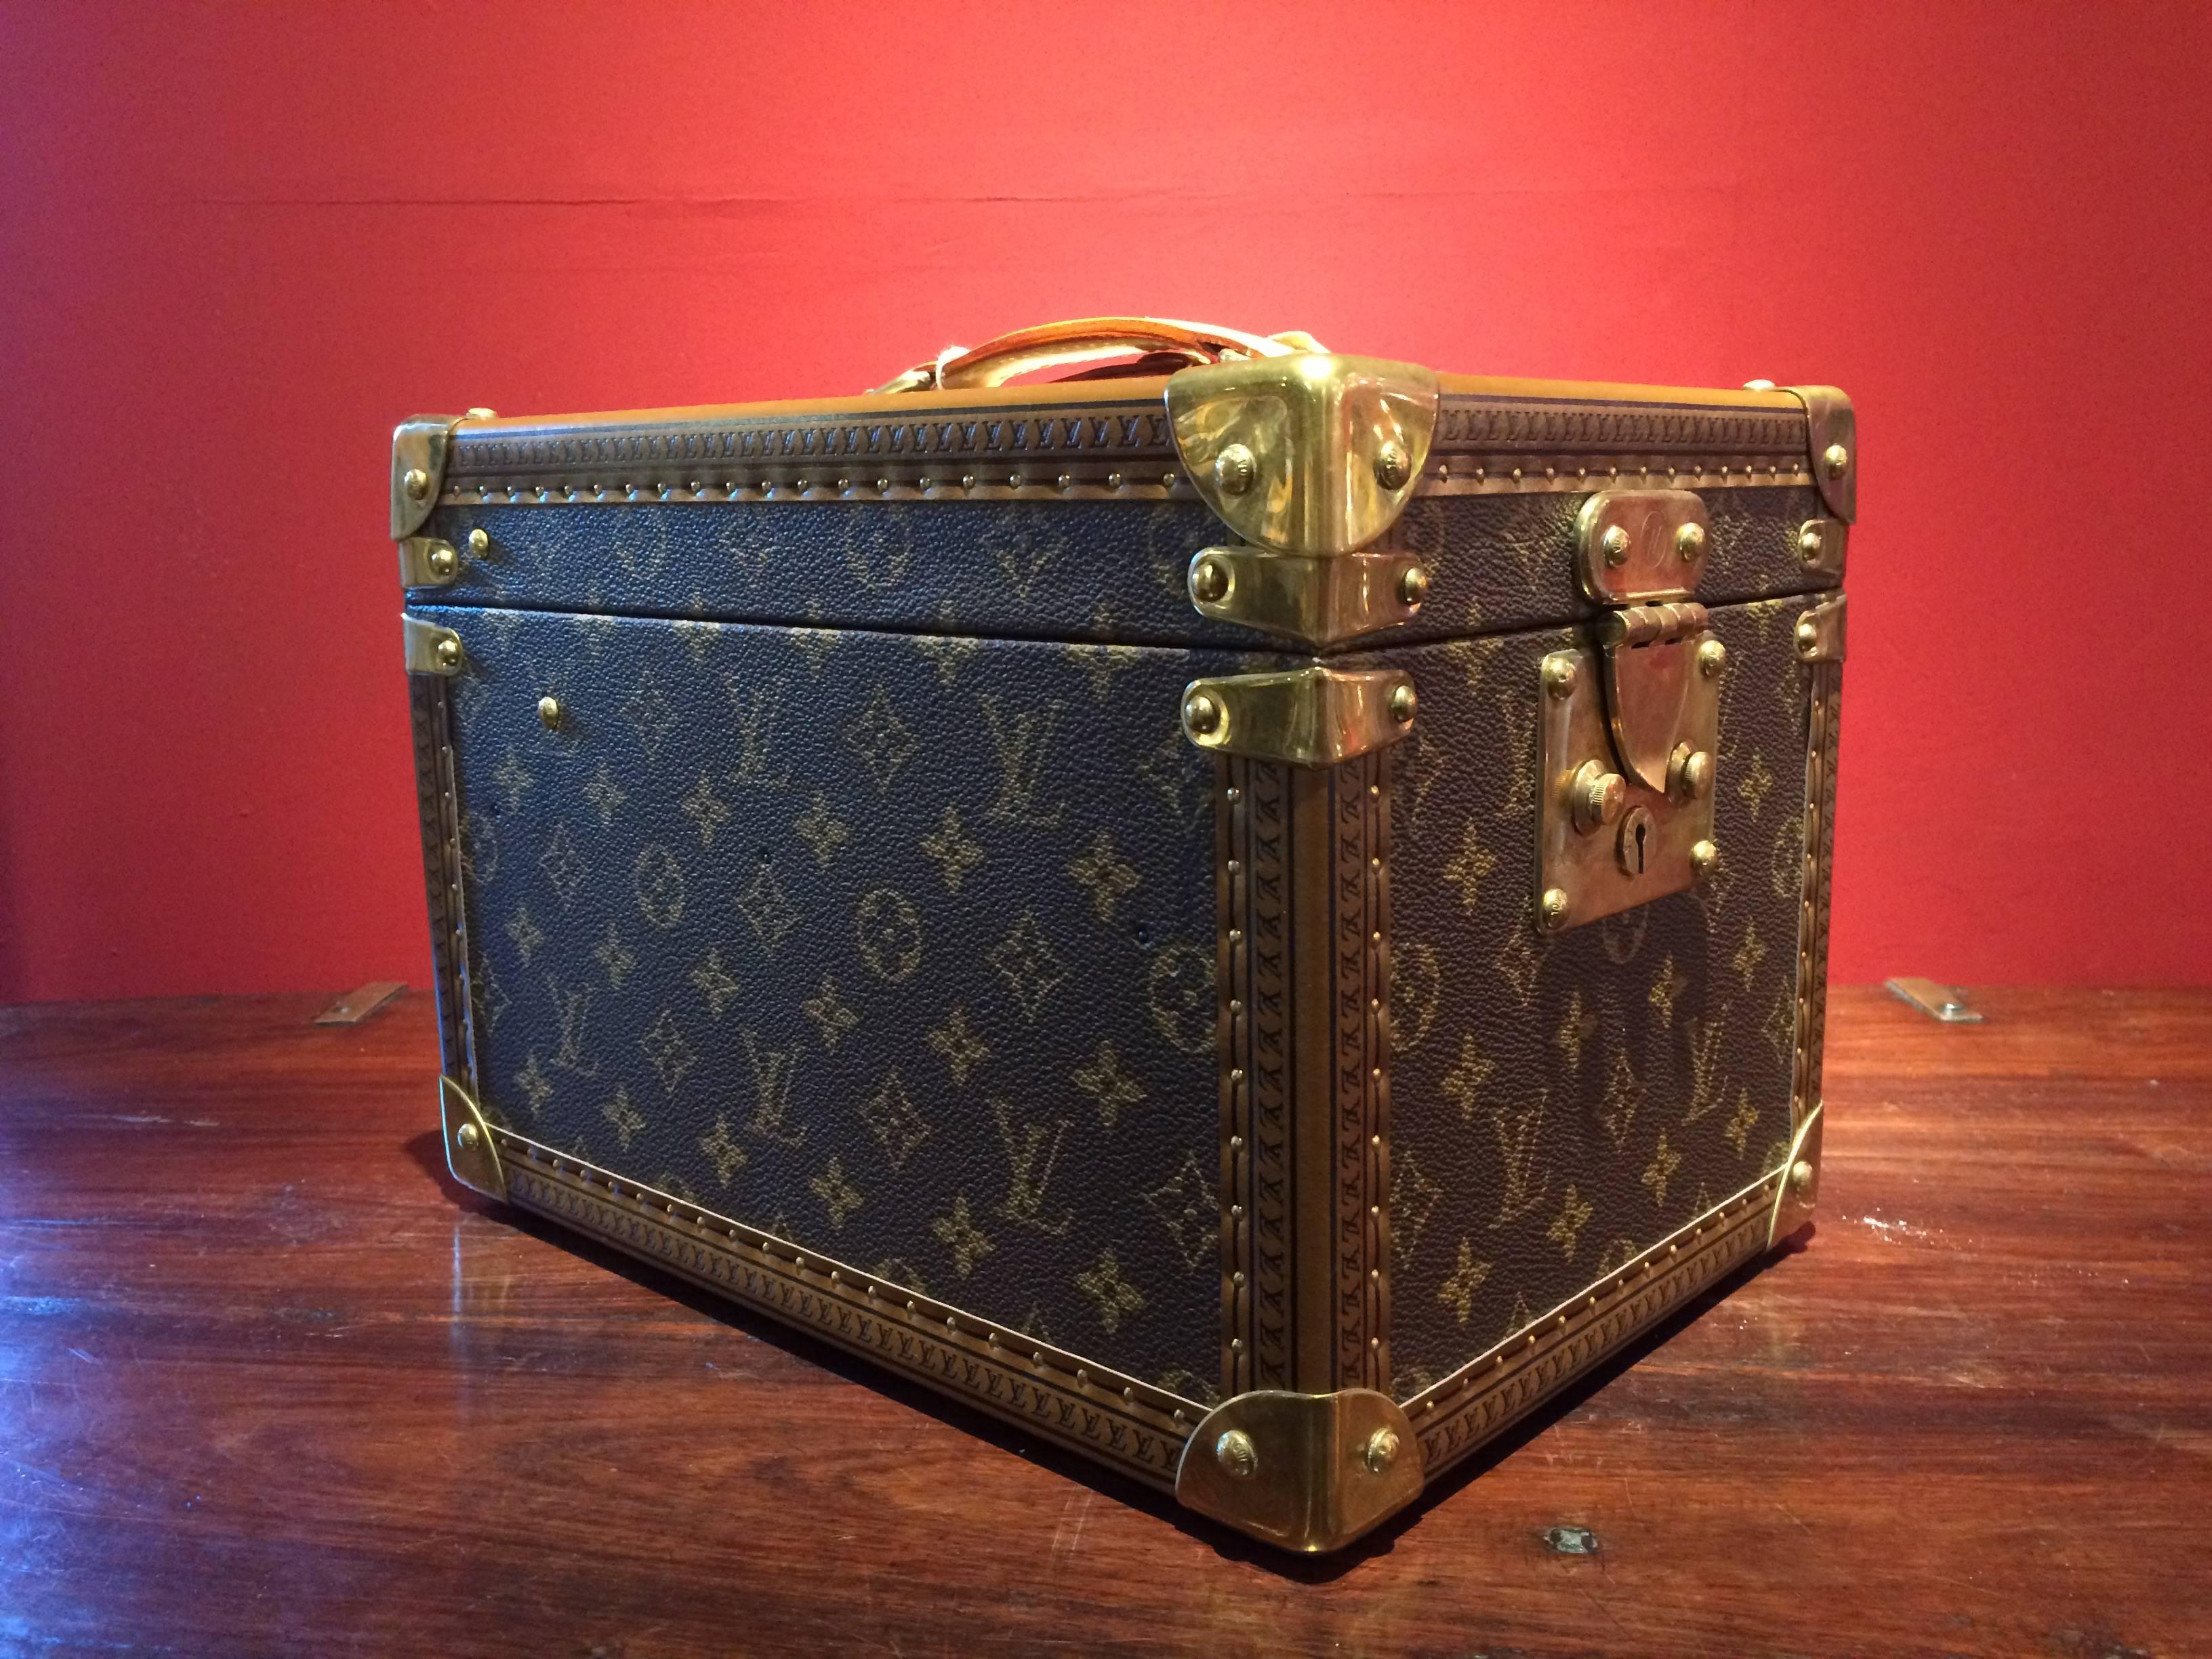 Louis Vuitton Monogramed Vanity Case.
Leather Top handle with detachable luggage tag.
Fitted with detachable mirror box.
Complete with keys.

Excellent condition.